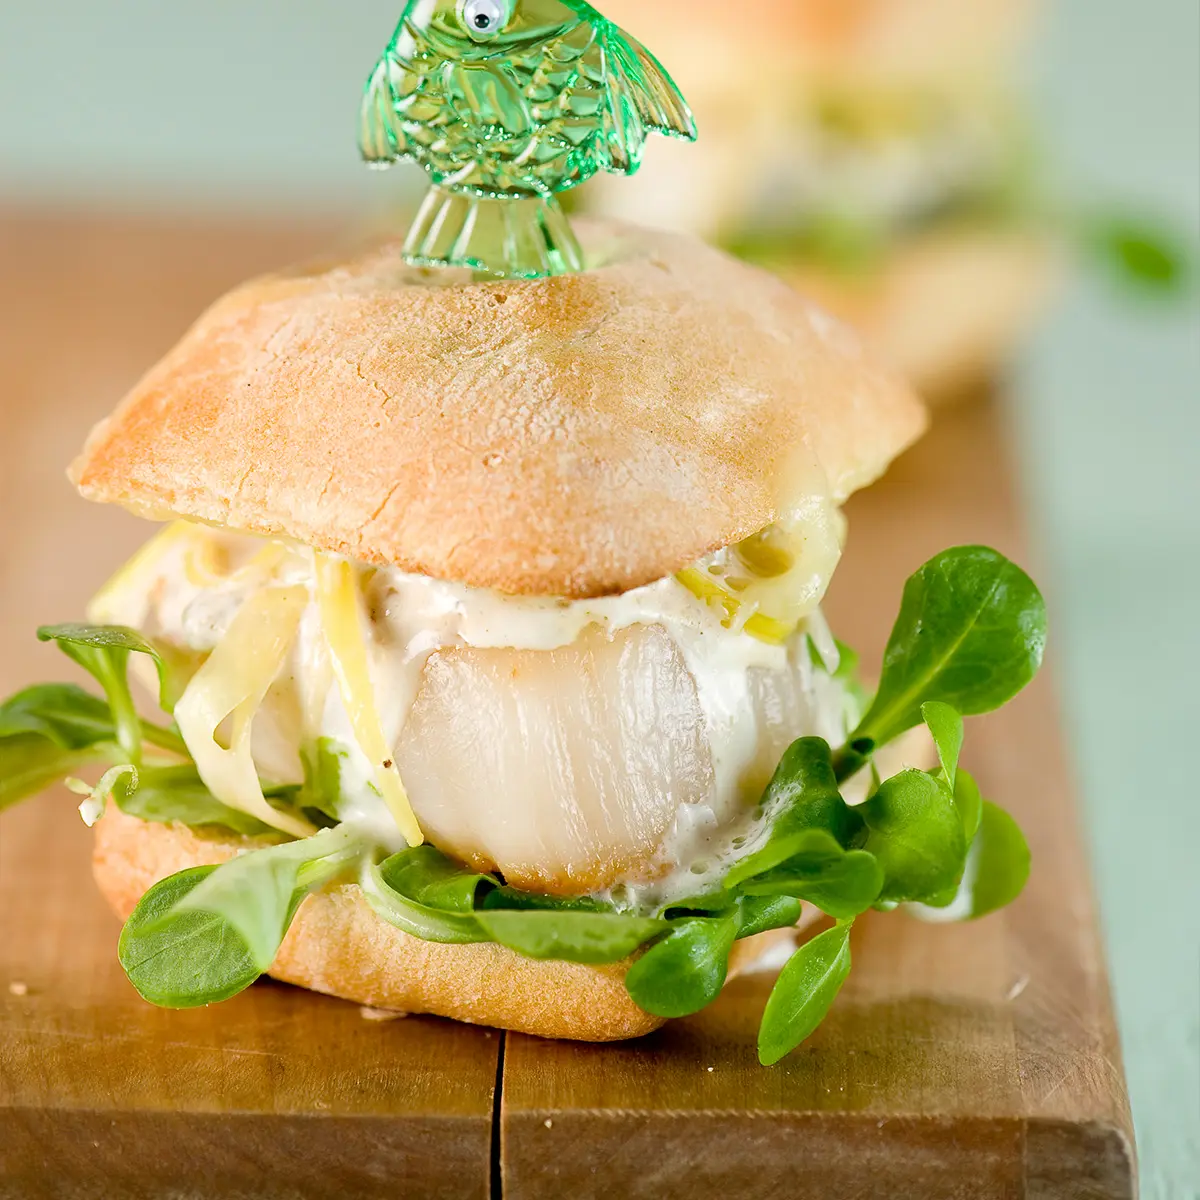 Scallops miniburgers with leeks and brie, tartar sauce with horseradish